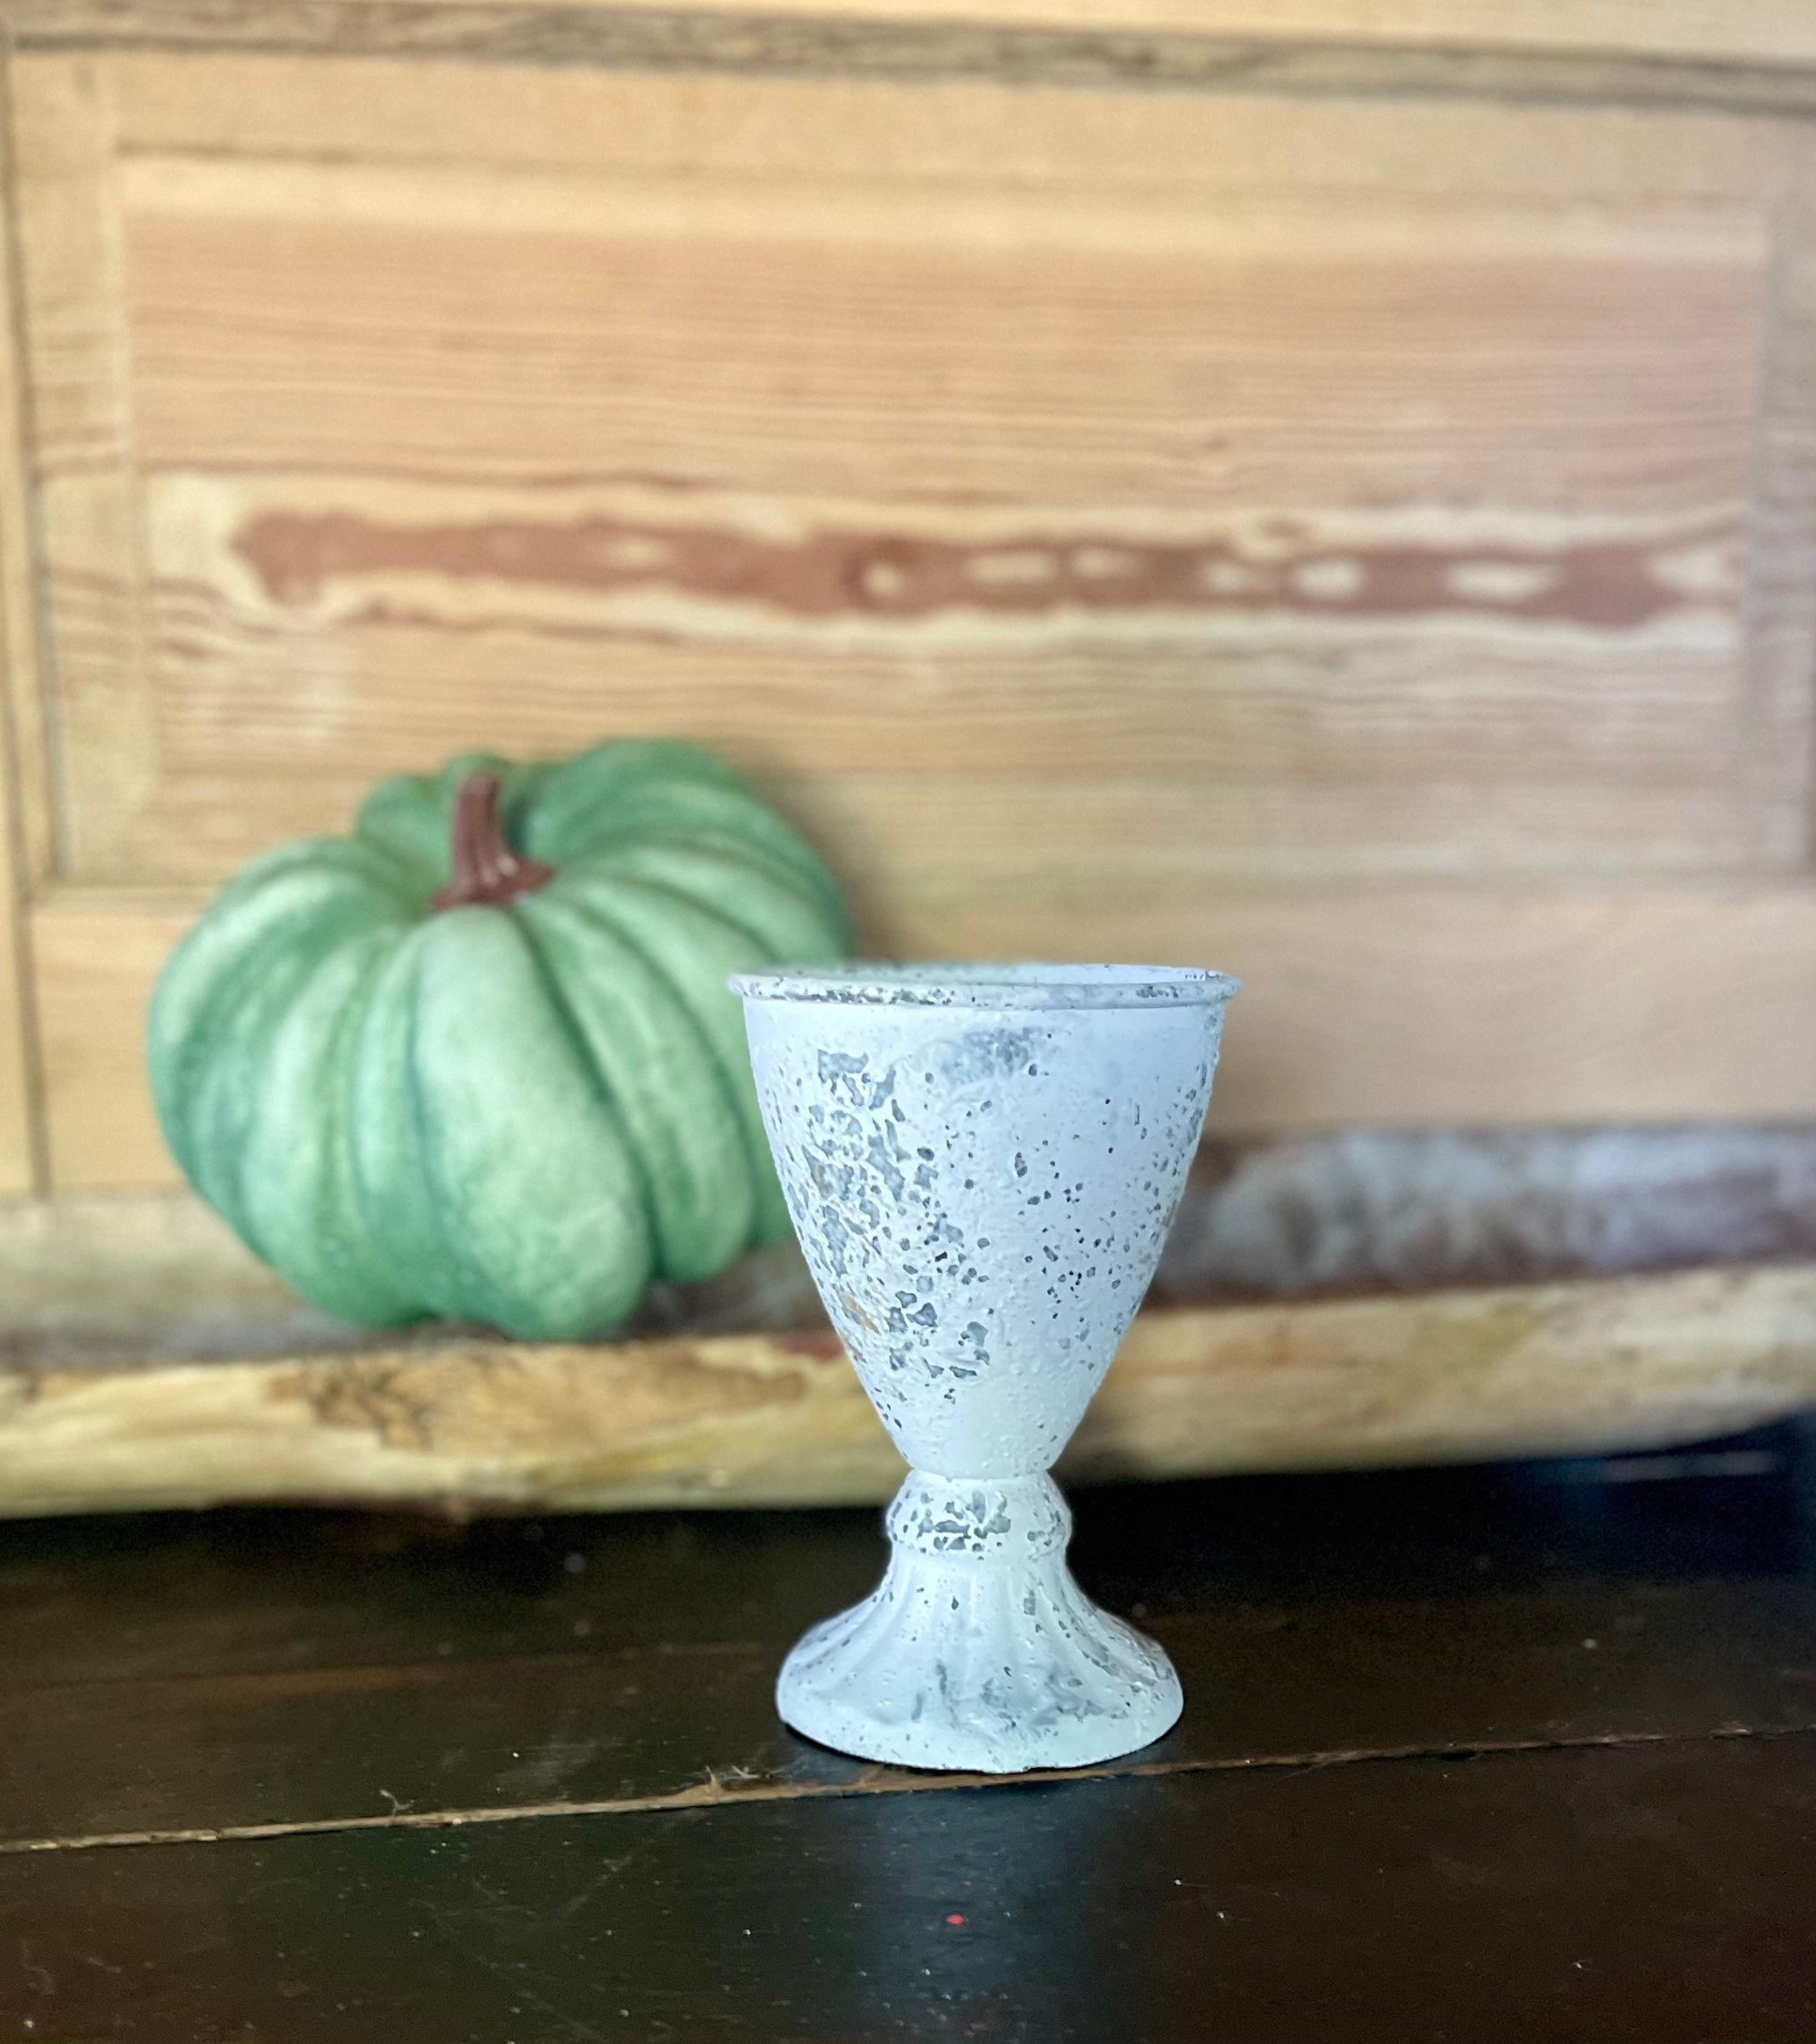 White Distressed Metal Goblet Vase, Farmhouse candle cup, shabby chic decor, small trinket holder, Cottage decor